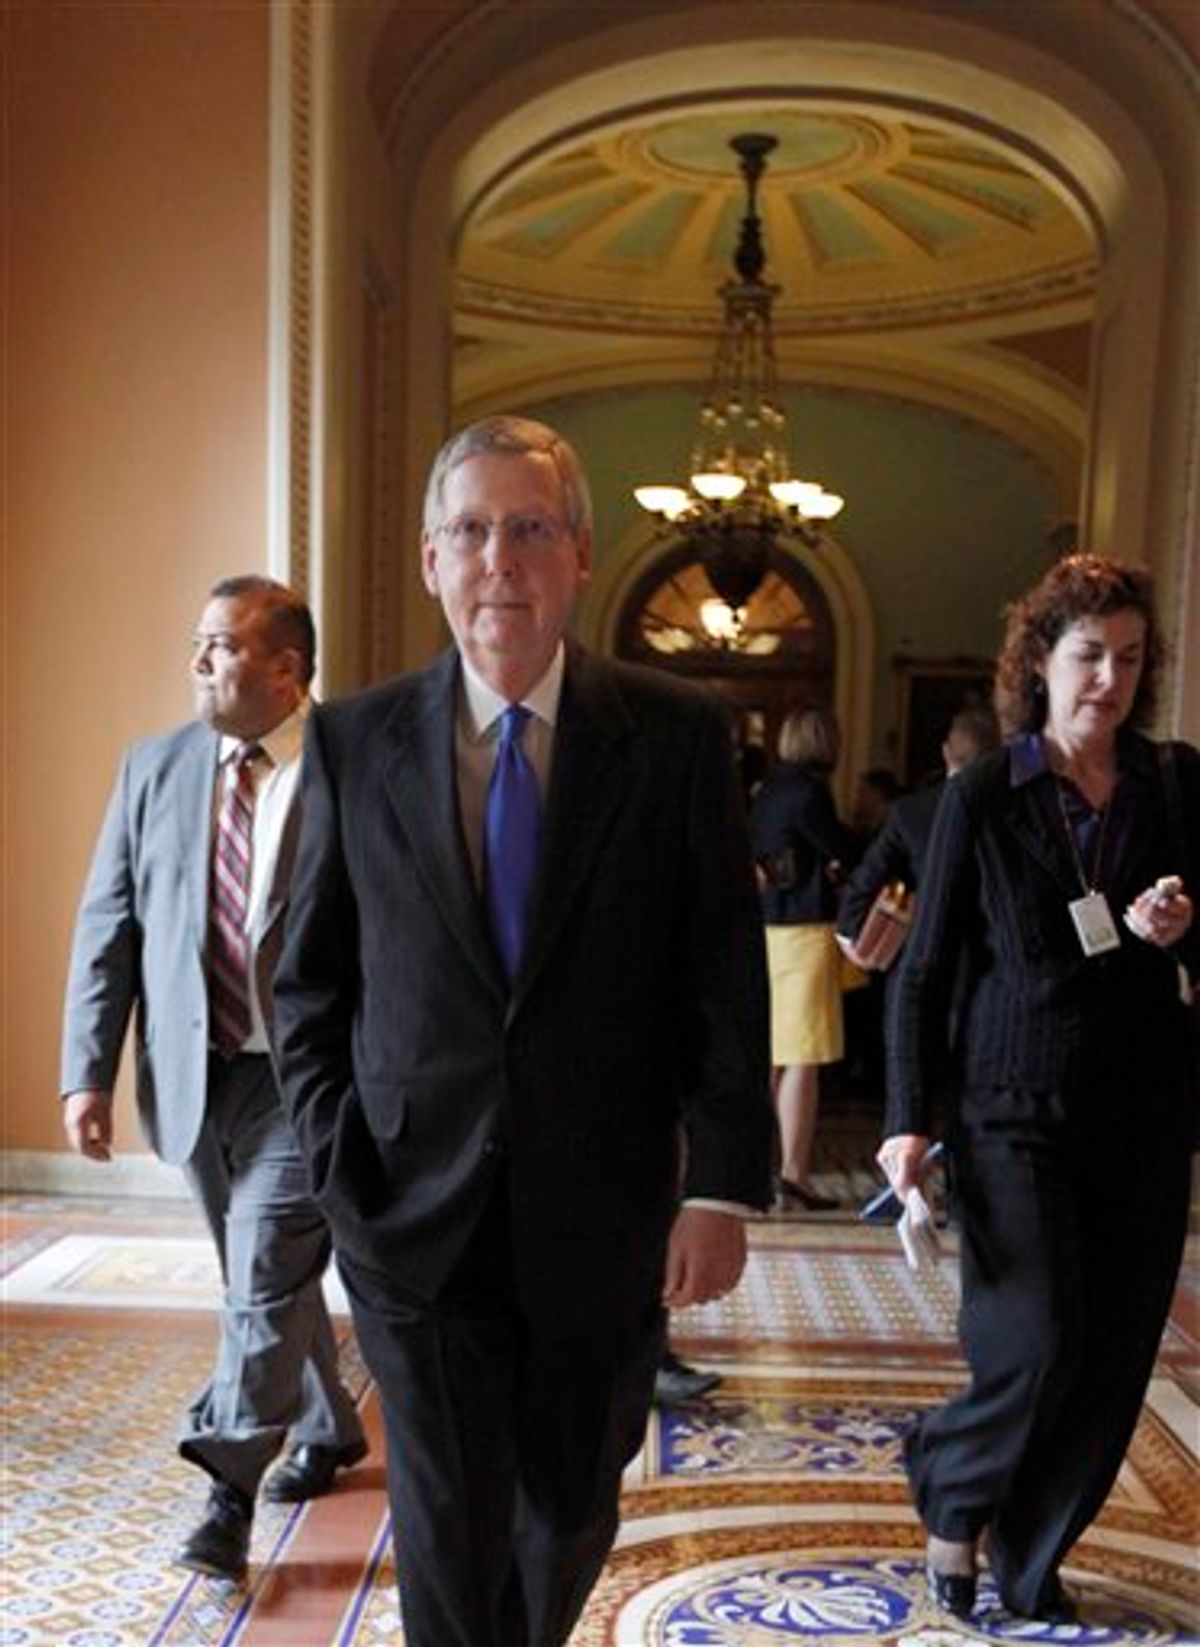 Senate Minority Leader Mitch McConnell of Ky. walks from the Senate chamber on Capitol Hill in Washington, Thursday, March 25, 2010.  (AP Photo/Manuel Balce Ceneta) (AP)